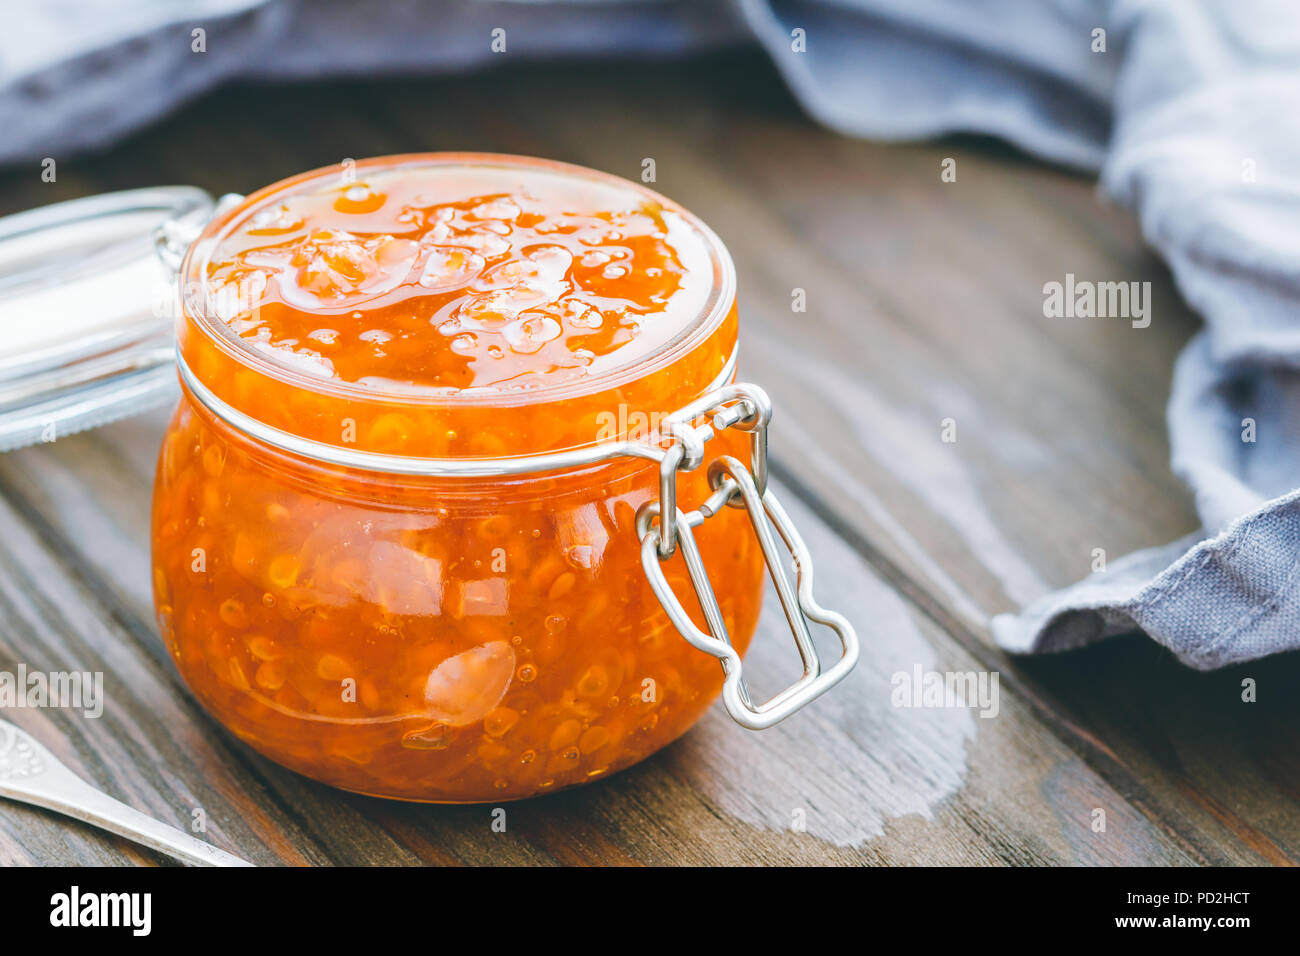 Orange Marmalade Jar High Resolution Stock Photography And Images Alamy